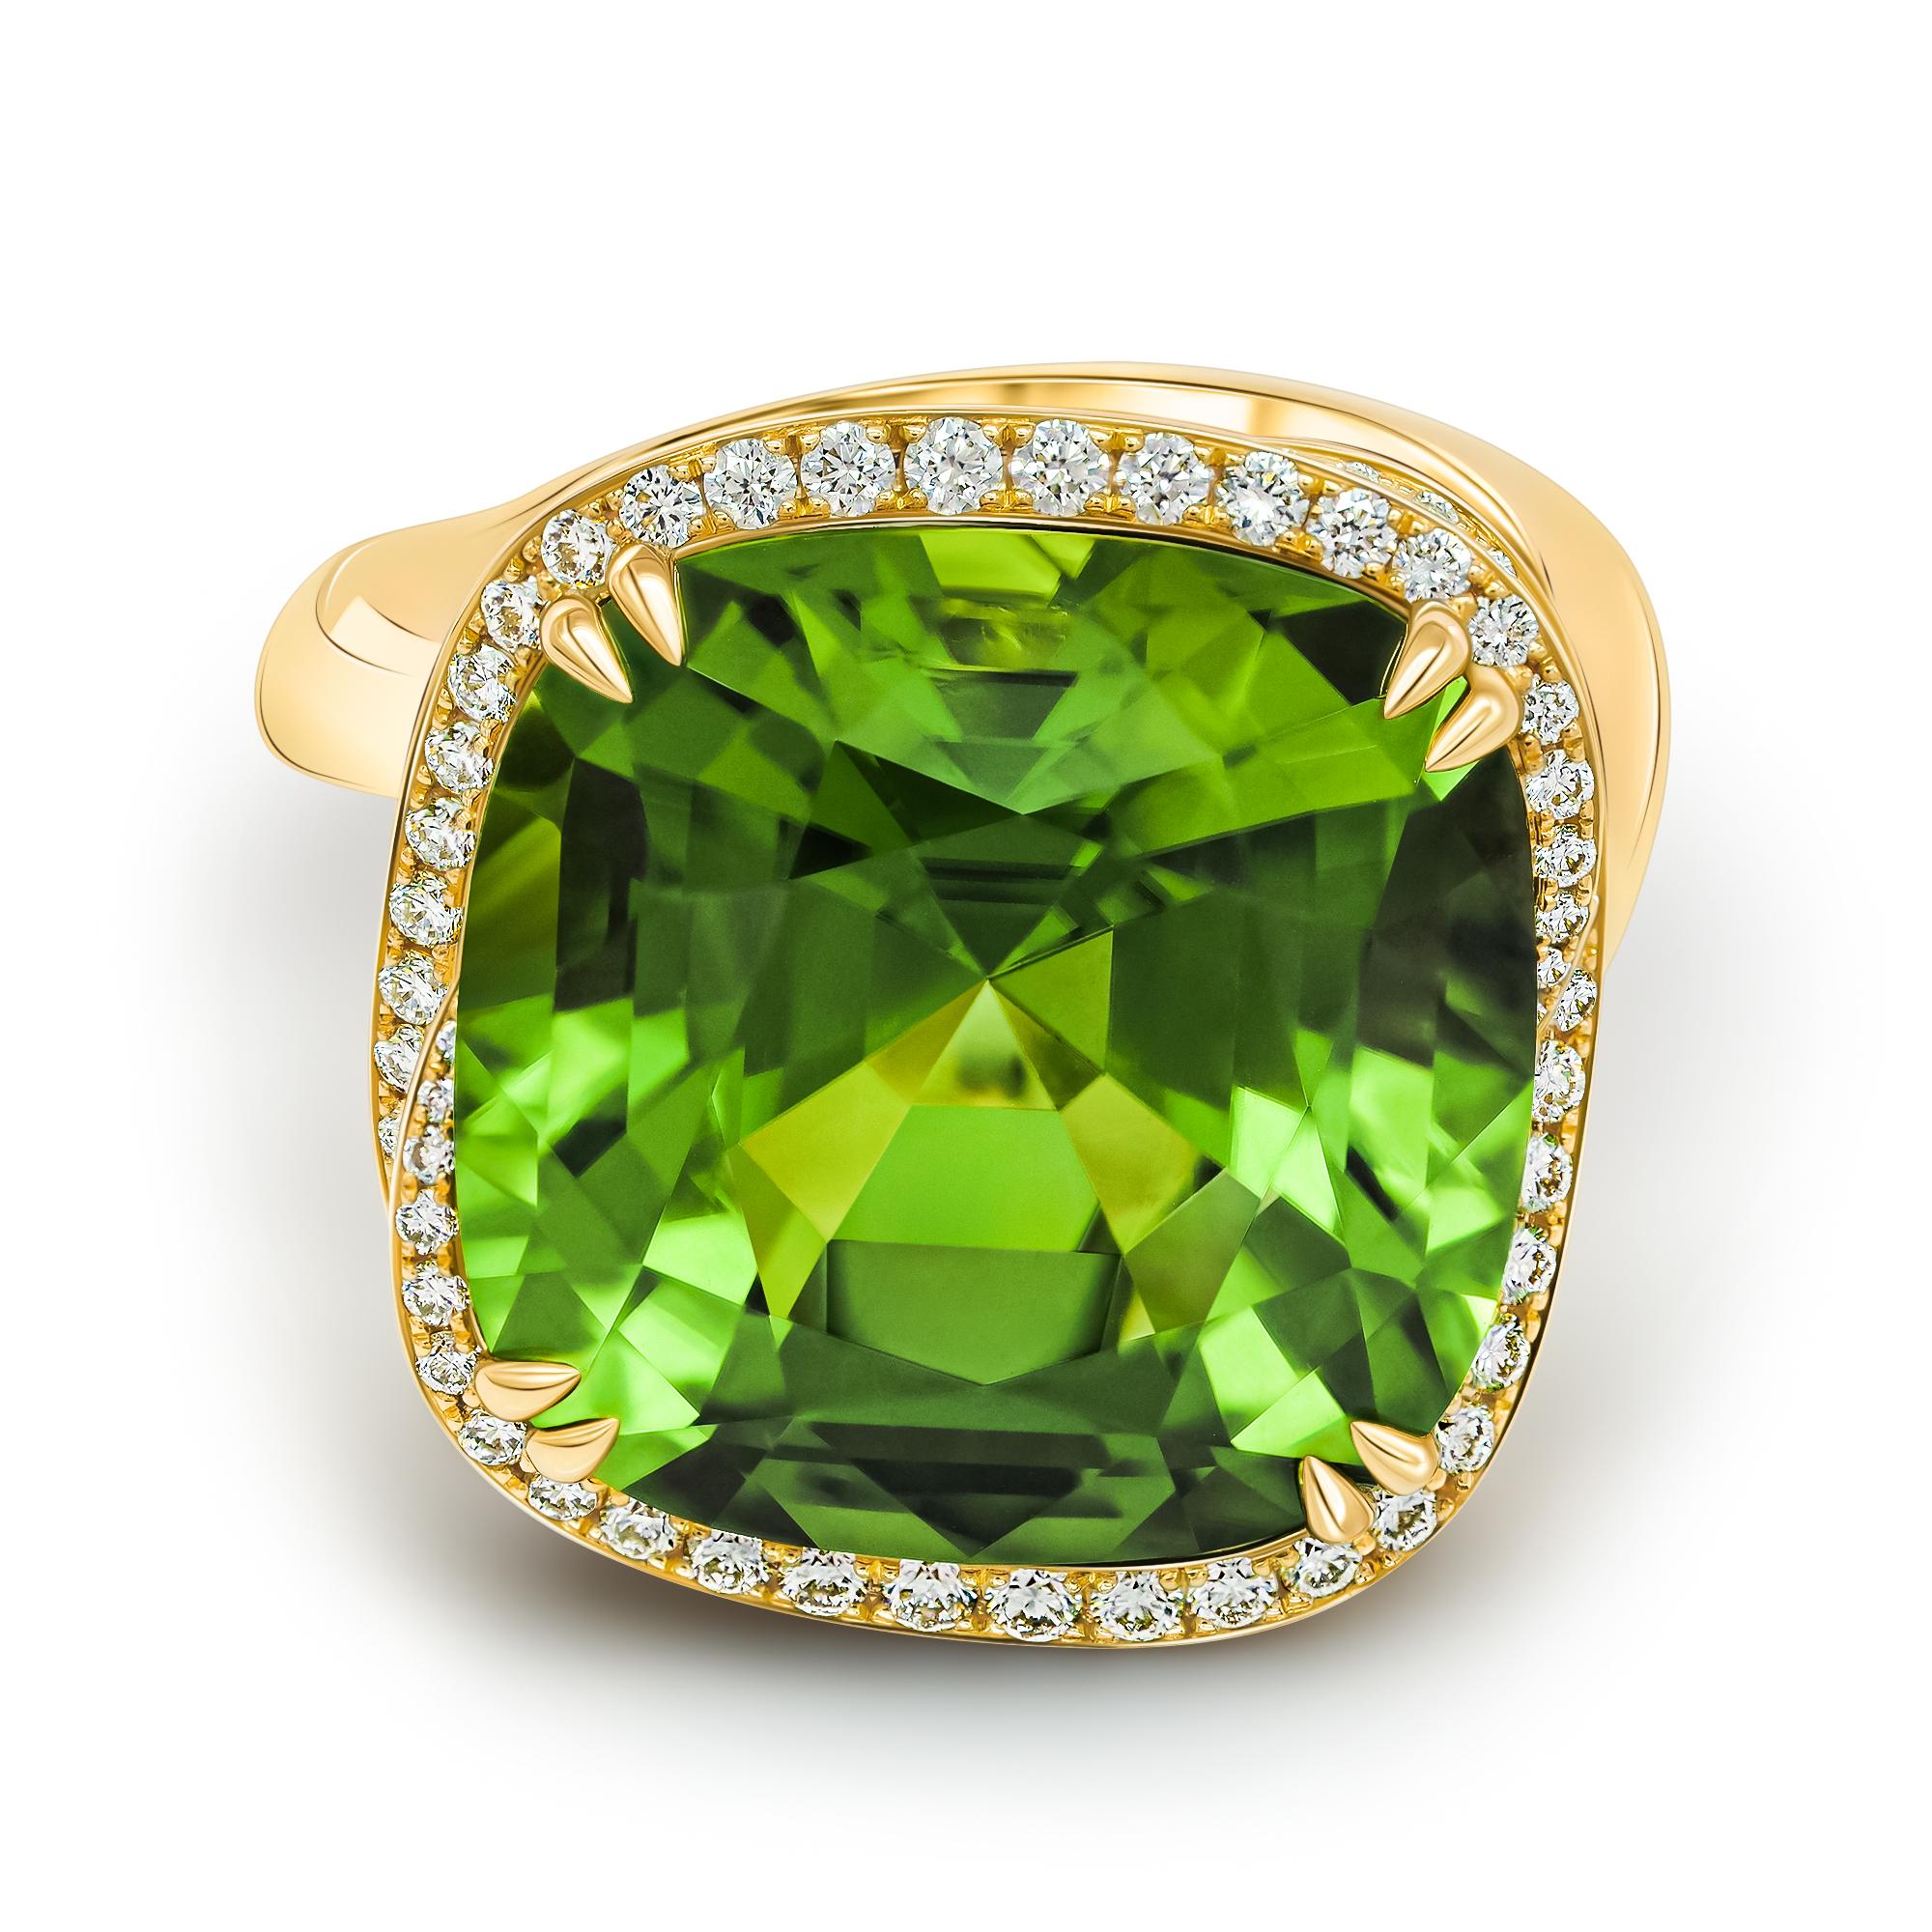 HYPNOTIC CHROME 
TOURMALINE RING 
from Indian Summer collection 
•	18k Yellow gold. 
•	Chrome Tourmaline in Cushion cut total carat weight 13.34.  
•	Diamonds, 70 pc round cut diamonds – total carat weight 0.38. 
•	Ring size – 6.75’.
•	Product